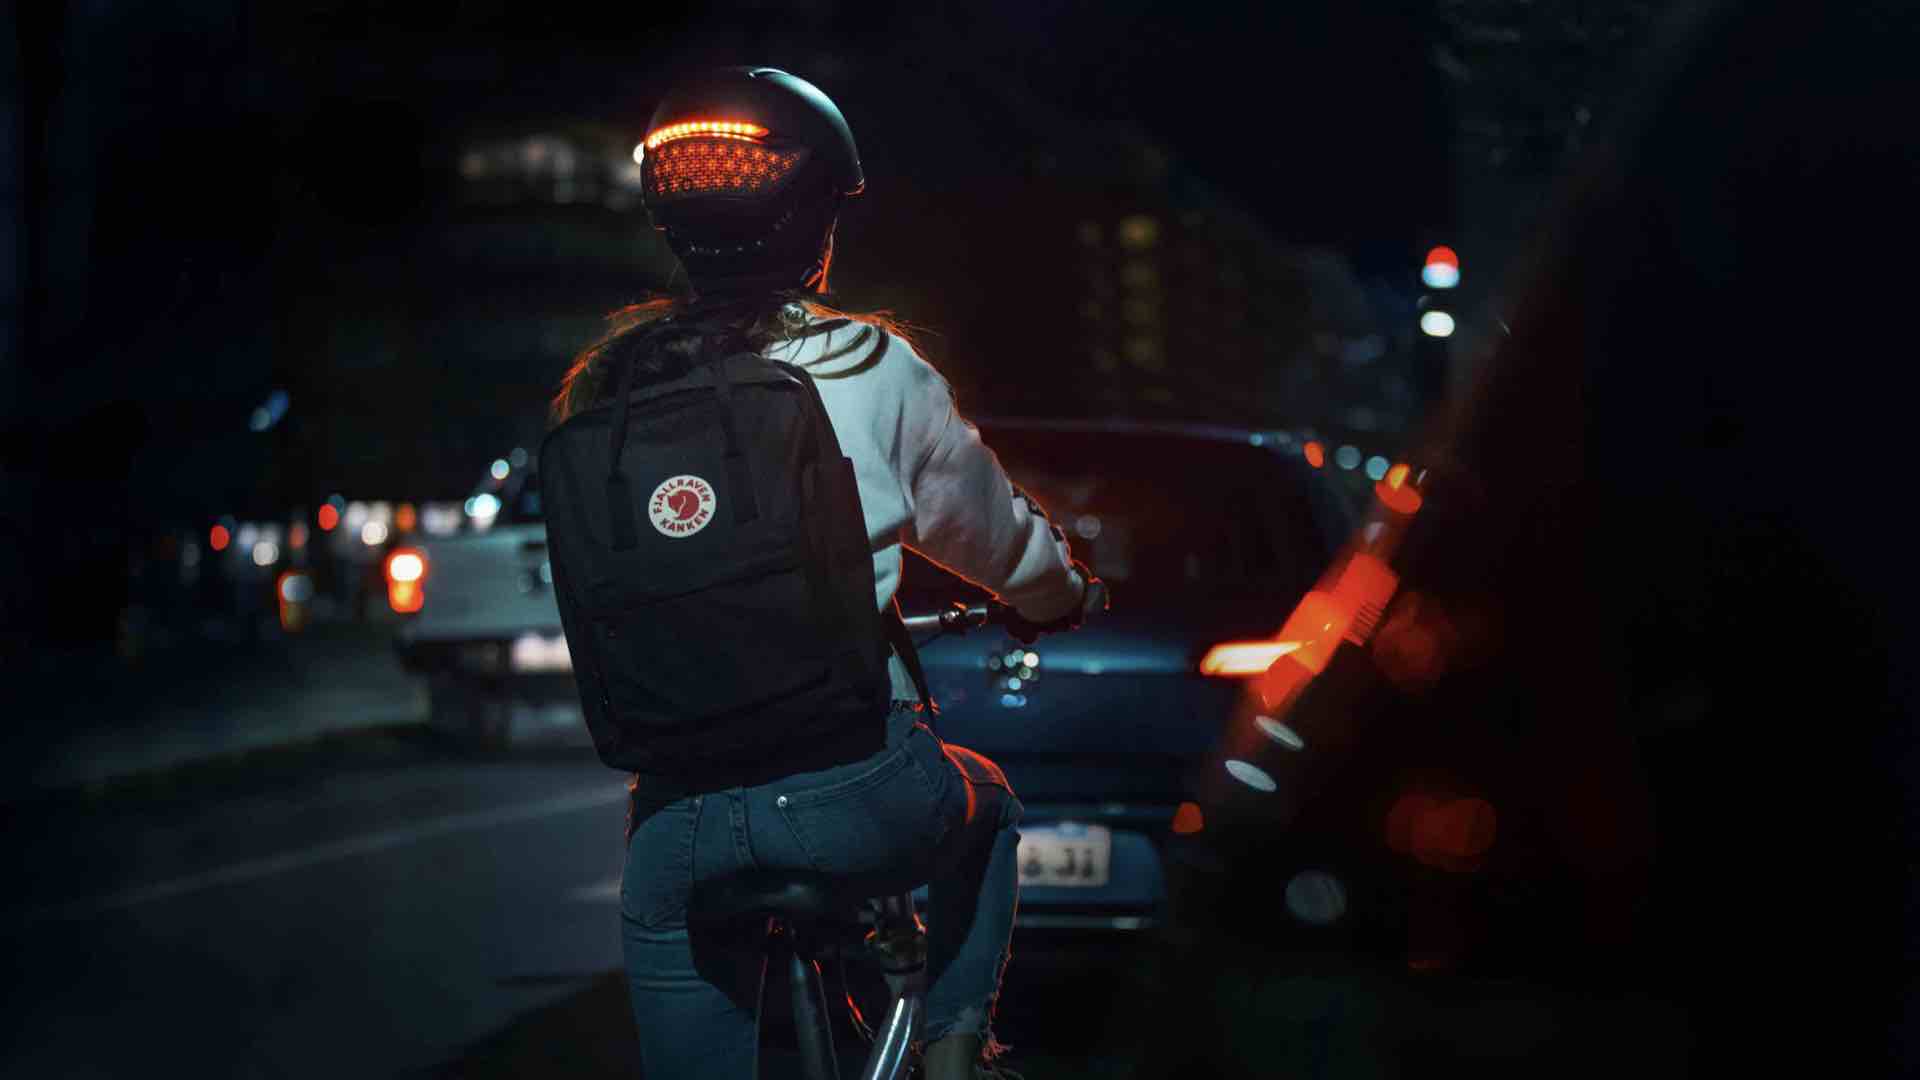 Wearing smart safety helmet at night while riding bicycle